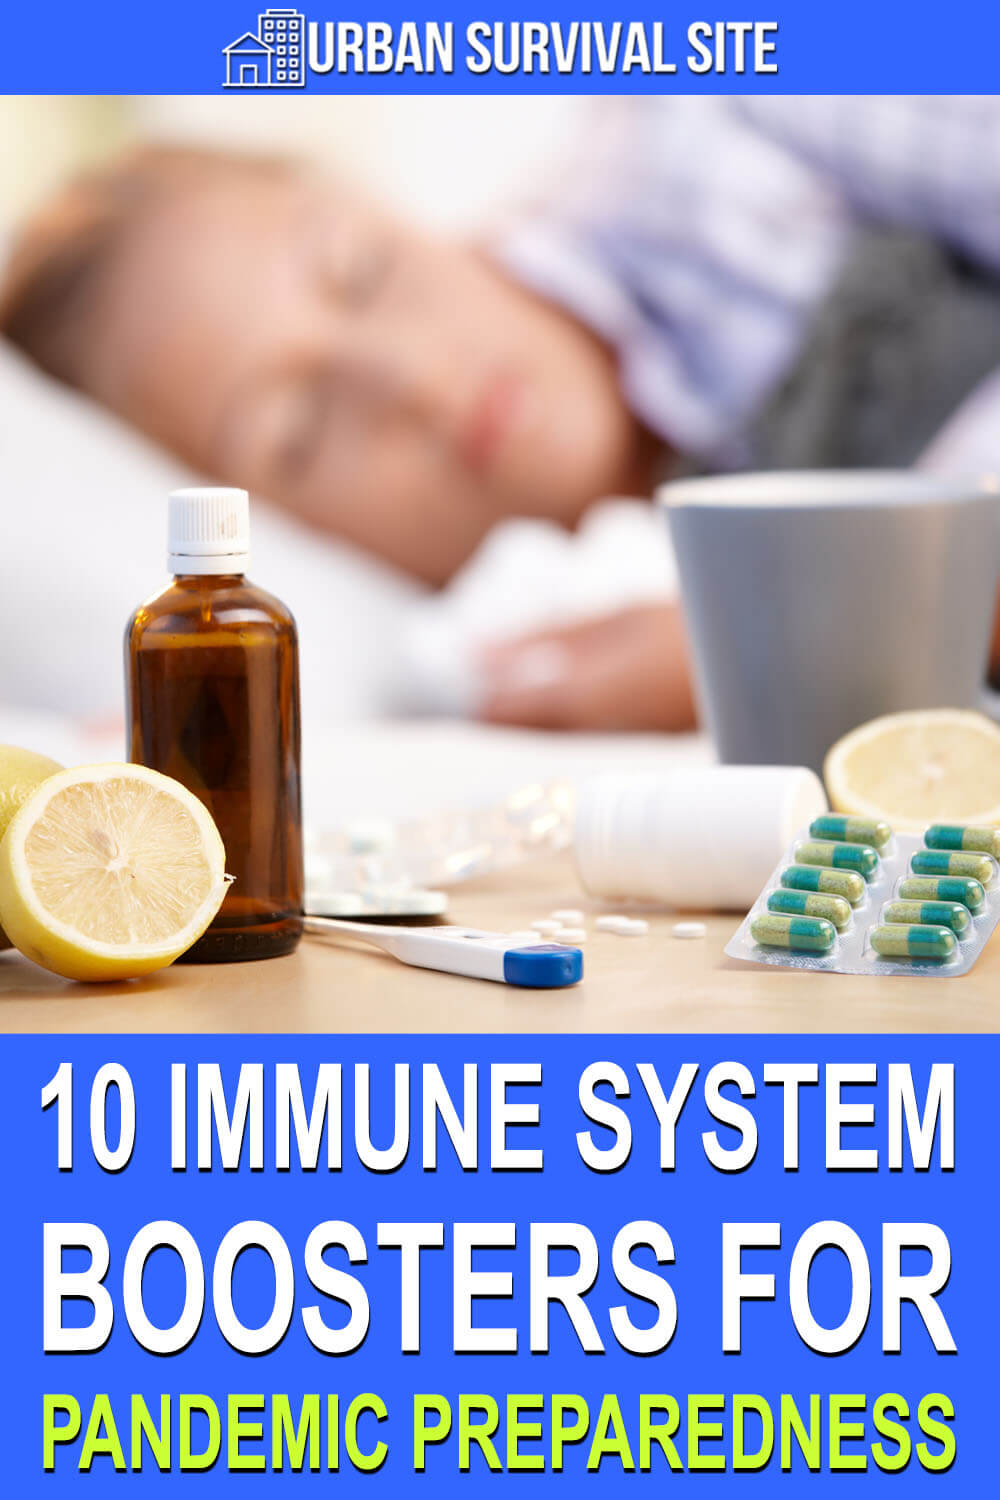 10 Immune System Boosters for Pandemic Preparedness